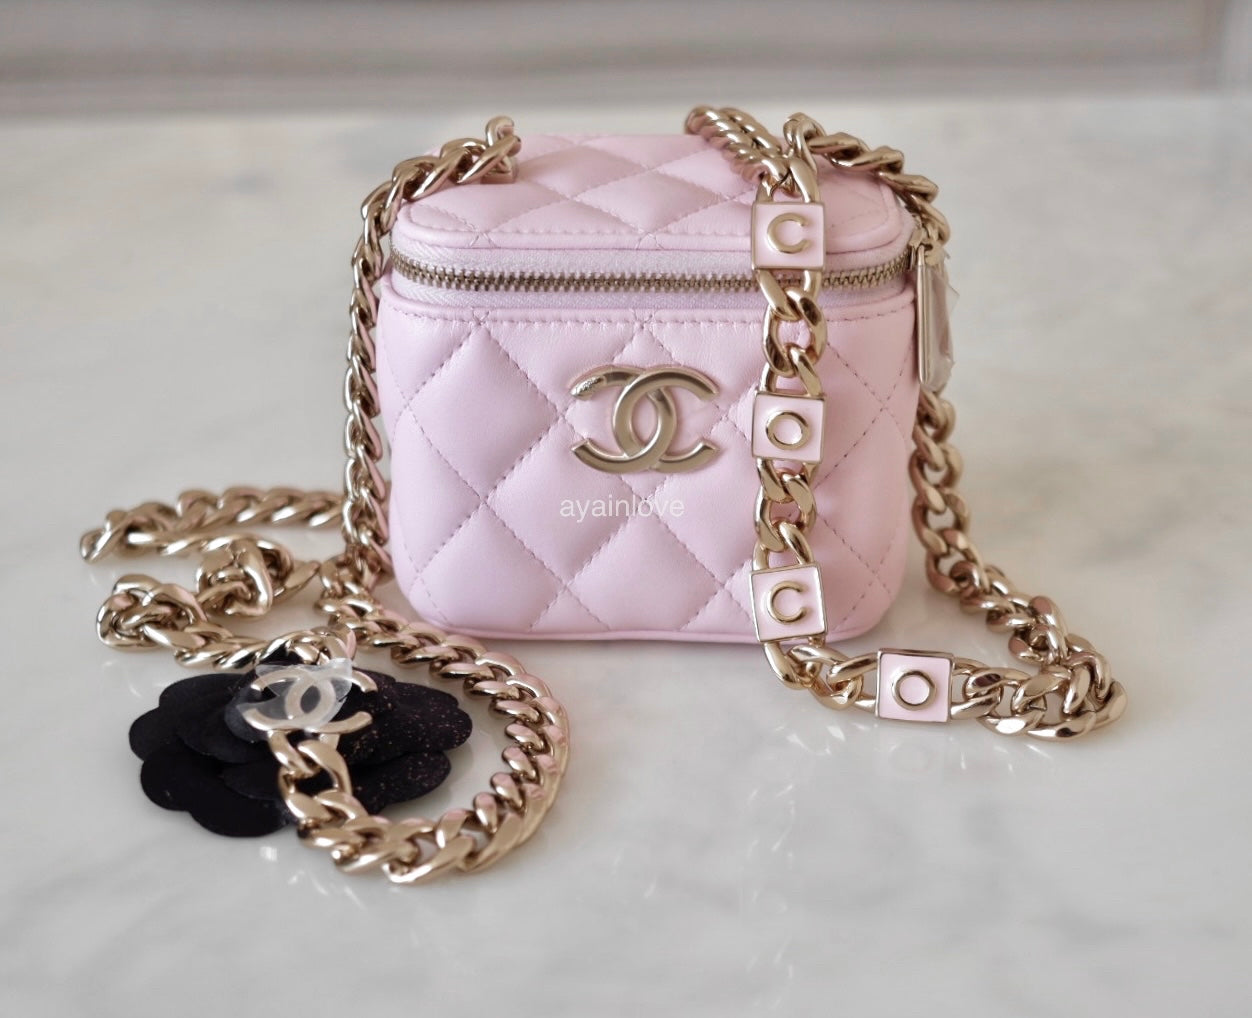 CHANEL 22S Light Pink Lamb Skin Square Vanity on Coco Chain Strap Light  Gold Hardware